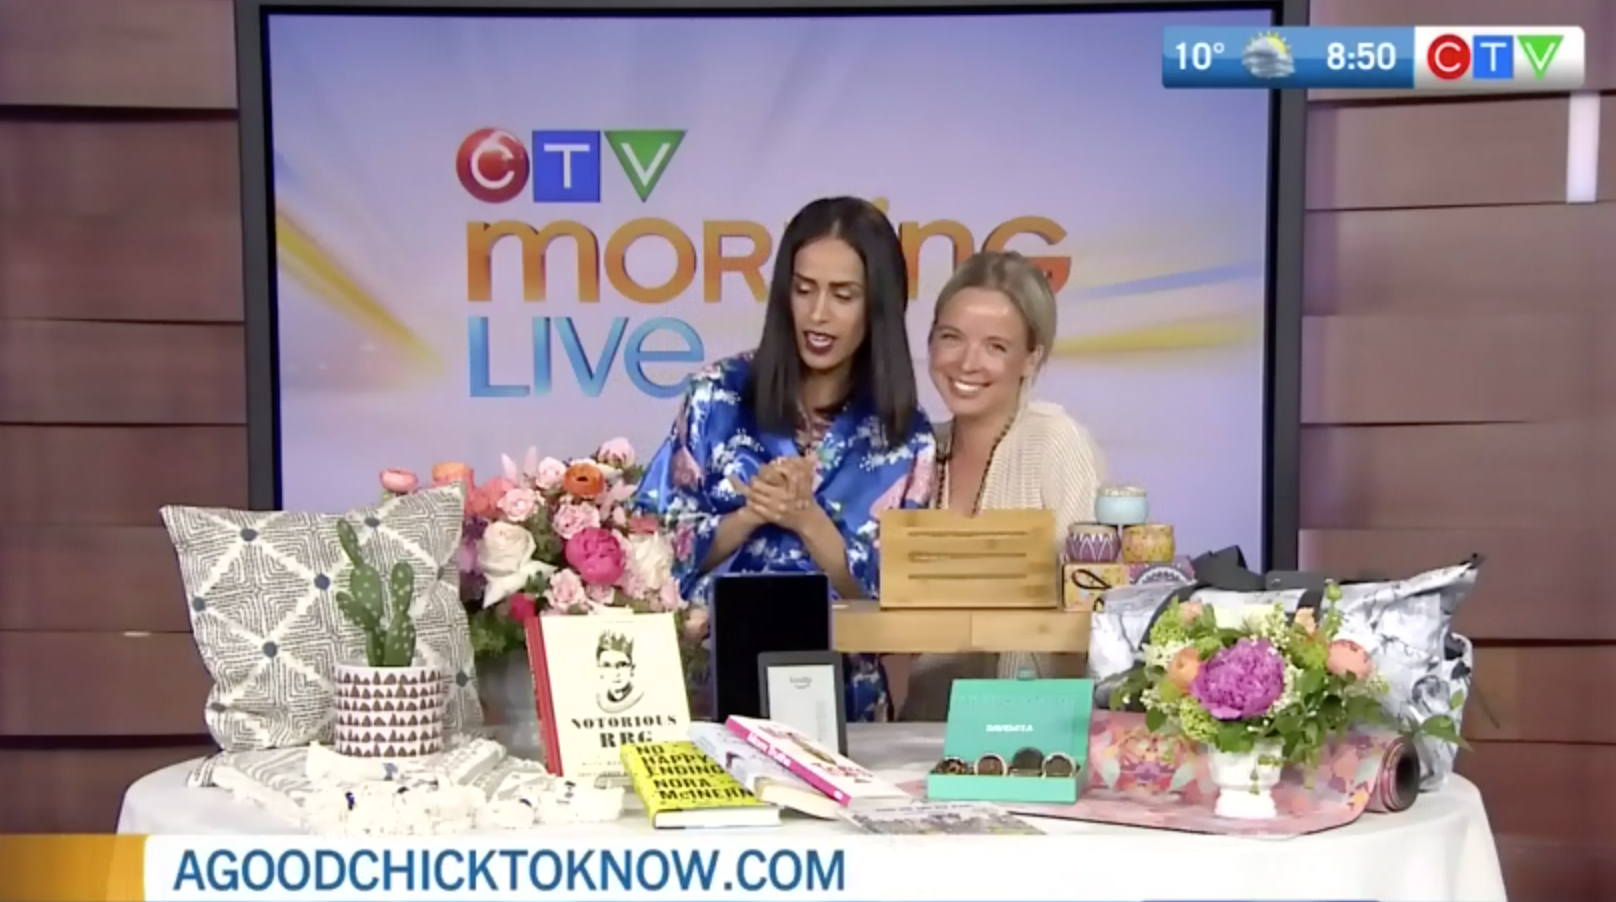 CTV Morning Live: The ultimate gifts for Mother's Day